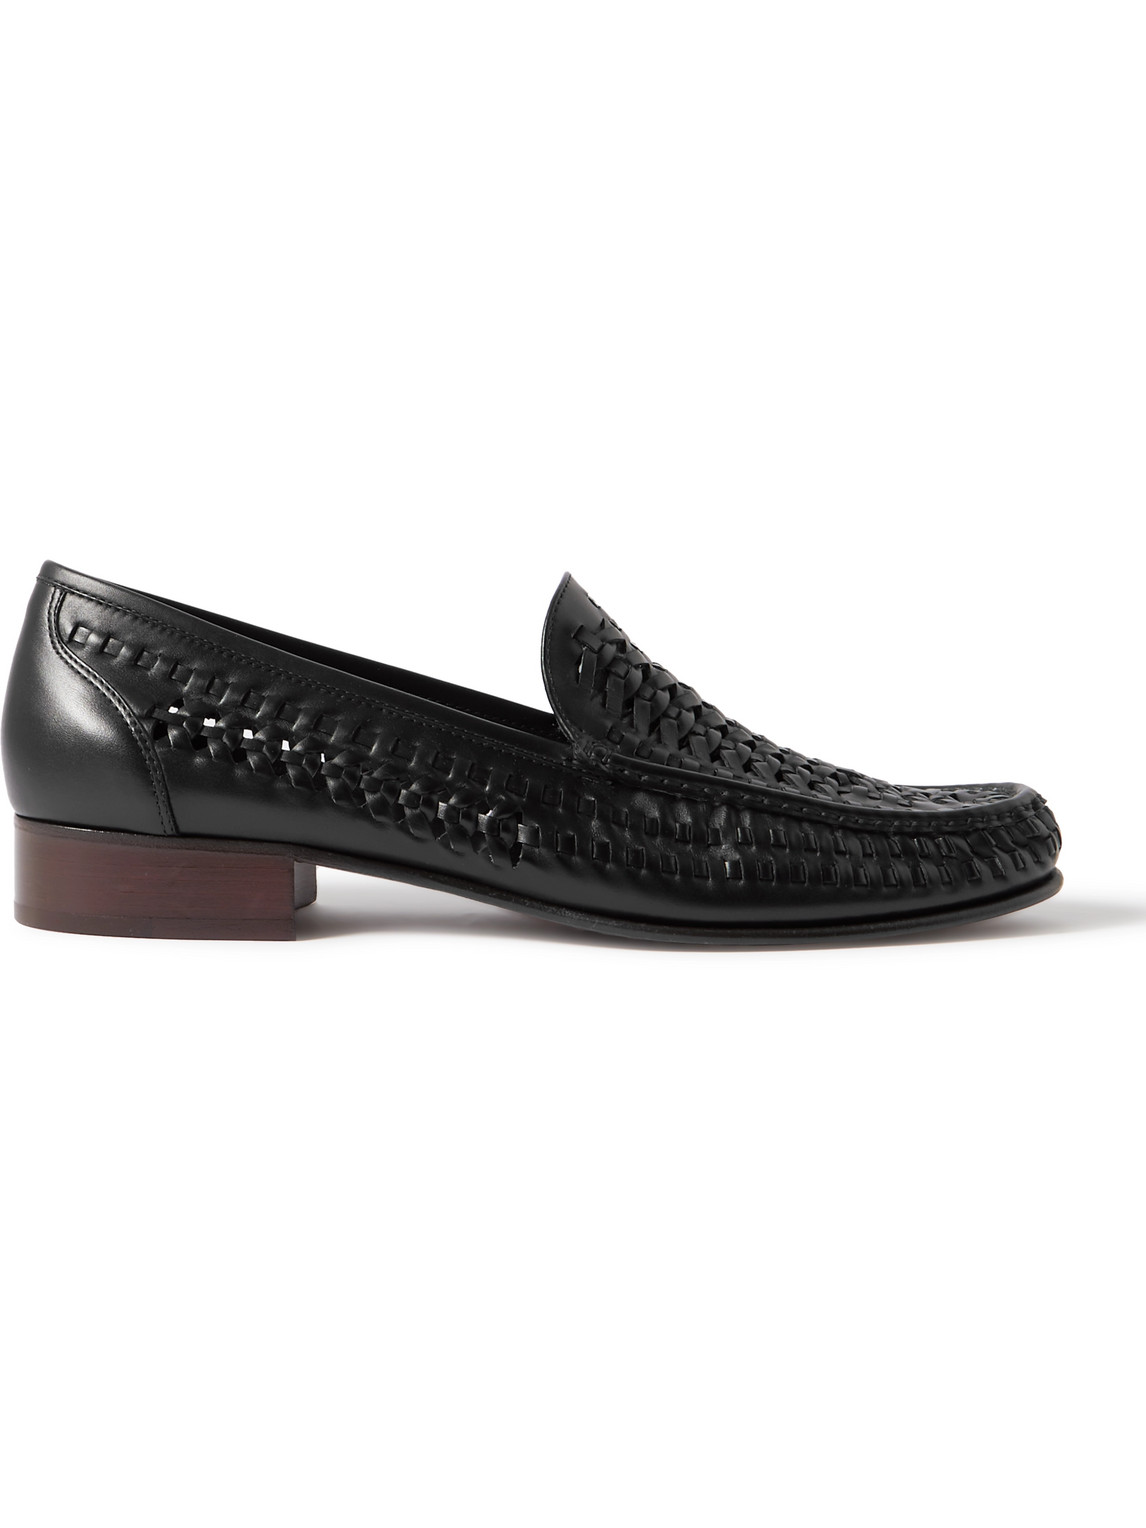 SAINT LAURENT SWANN WOVEN LEATHER LOAFERS